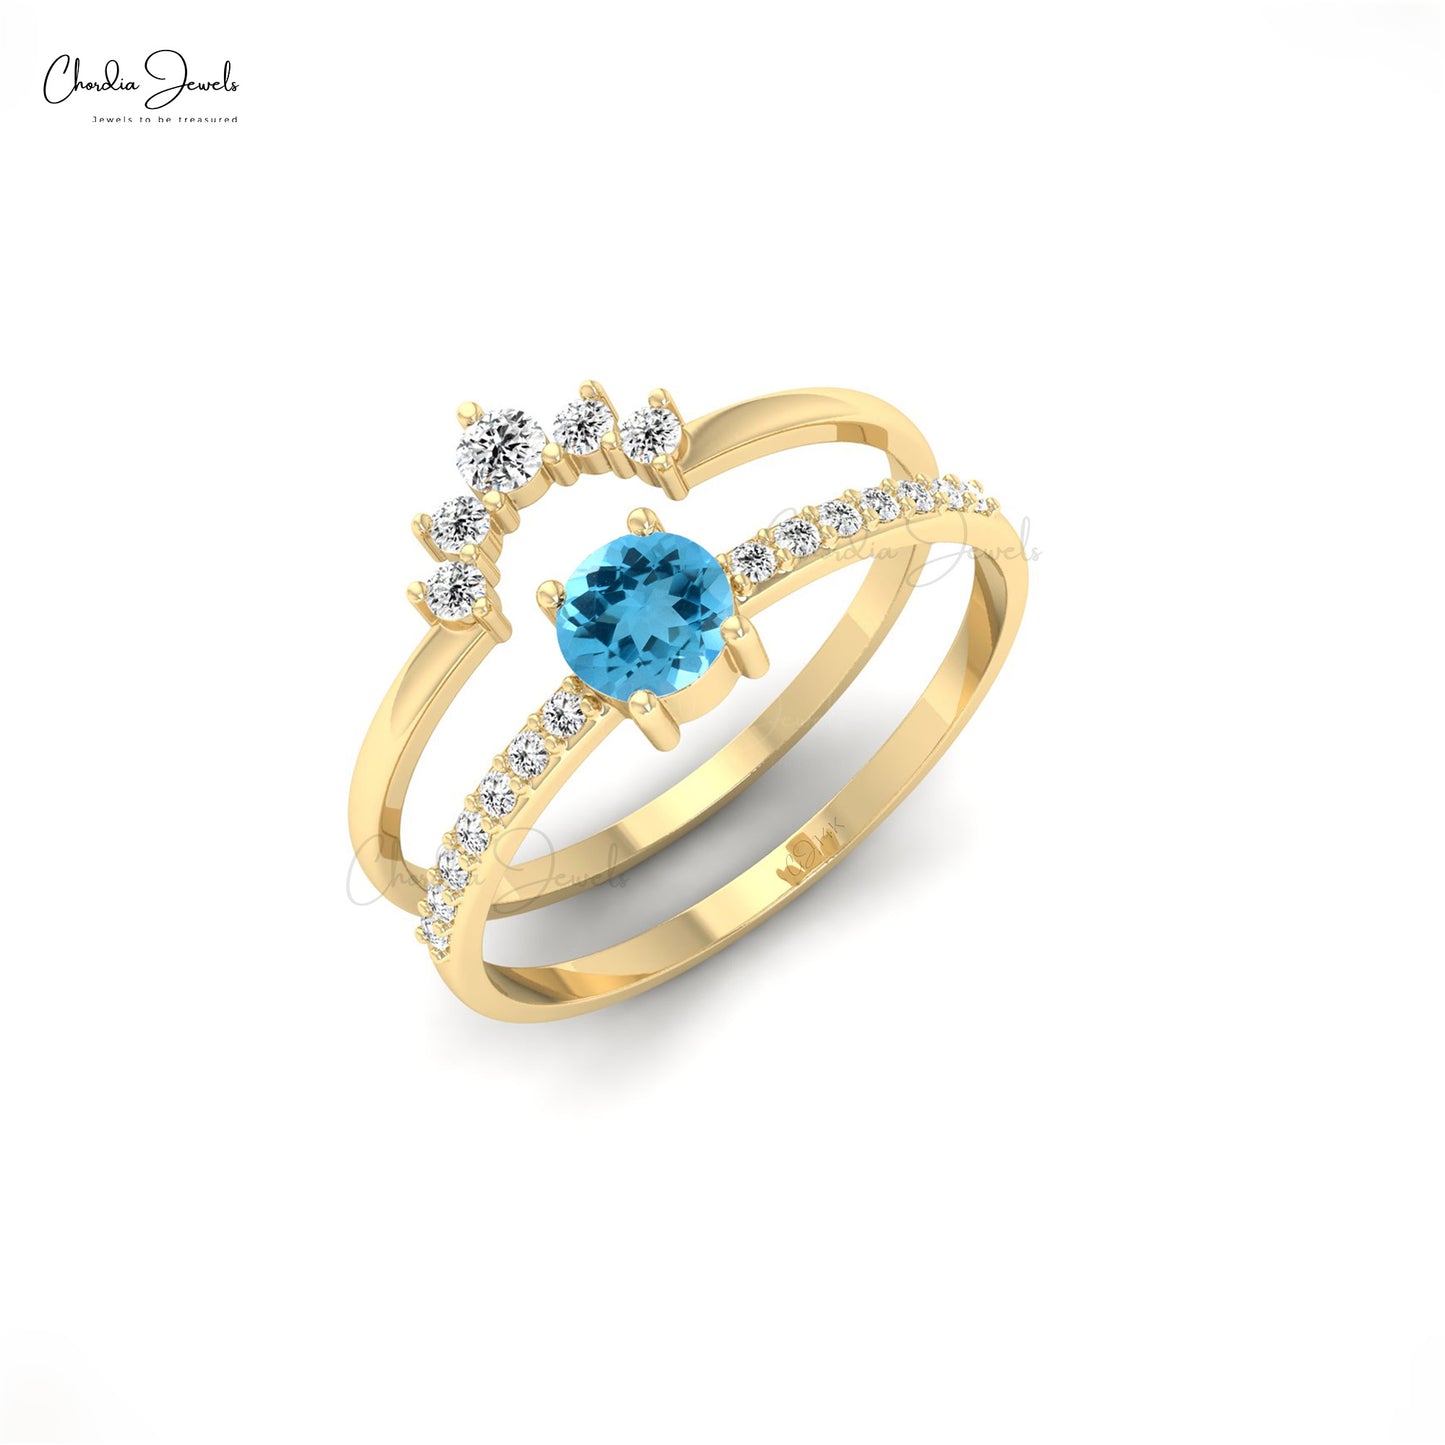 Real 14k Gold April Birthstone Diamond Stackable Ring 4mm Round Cut Prong Set Natural Swiss Blue Topaz Wedding Ring Hallmarked Jewelry For Women